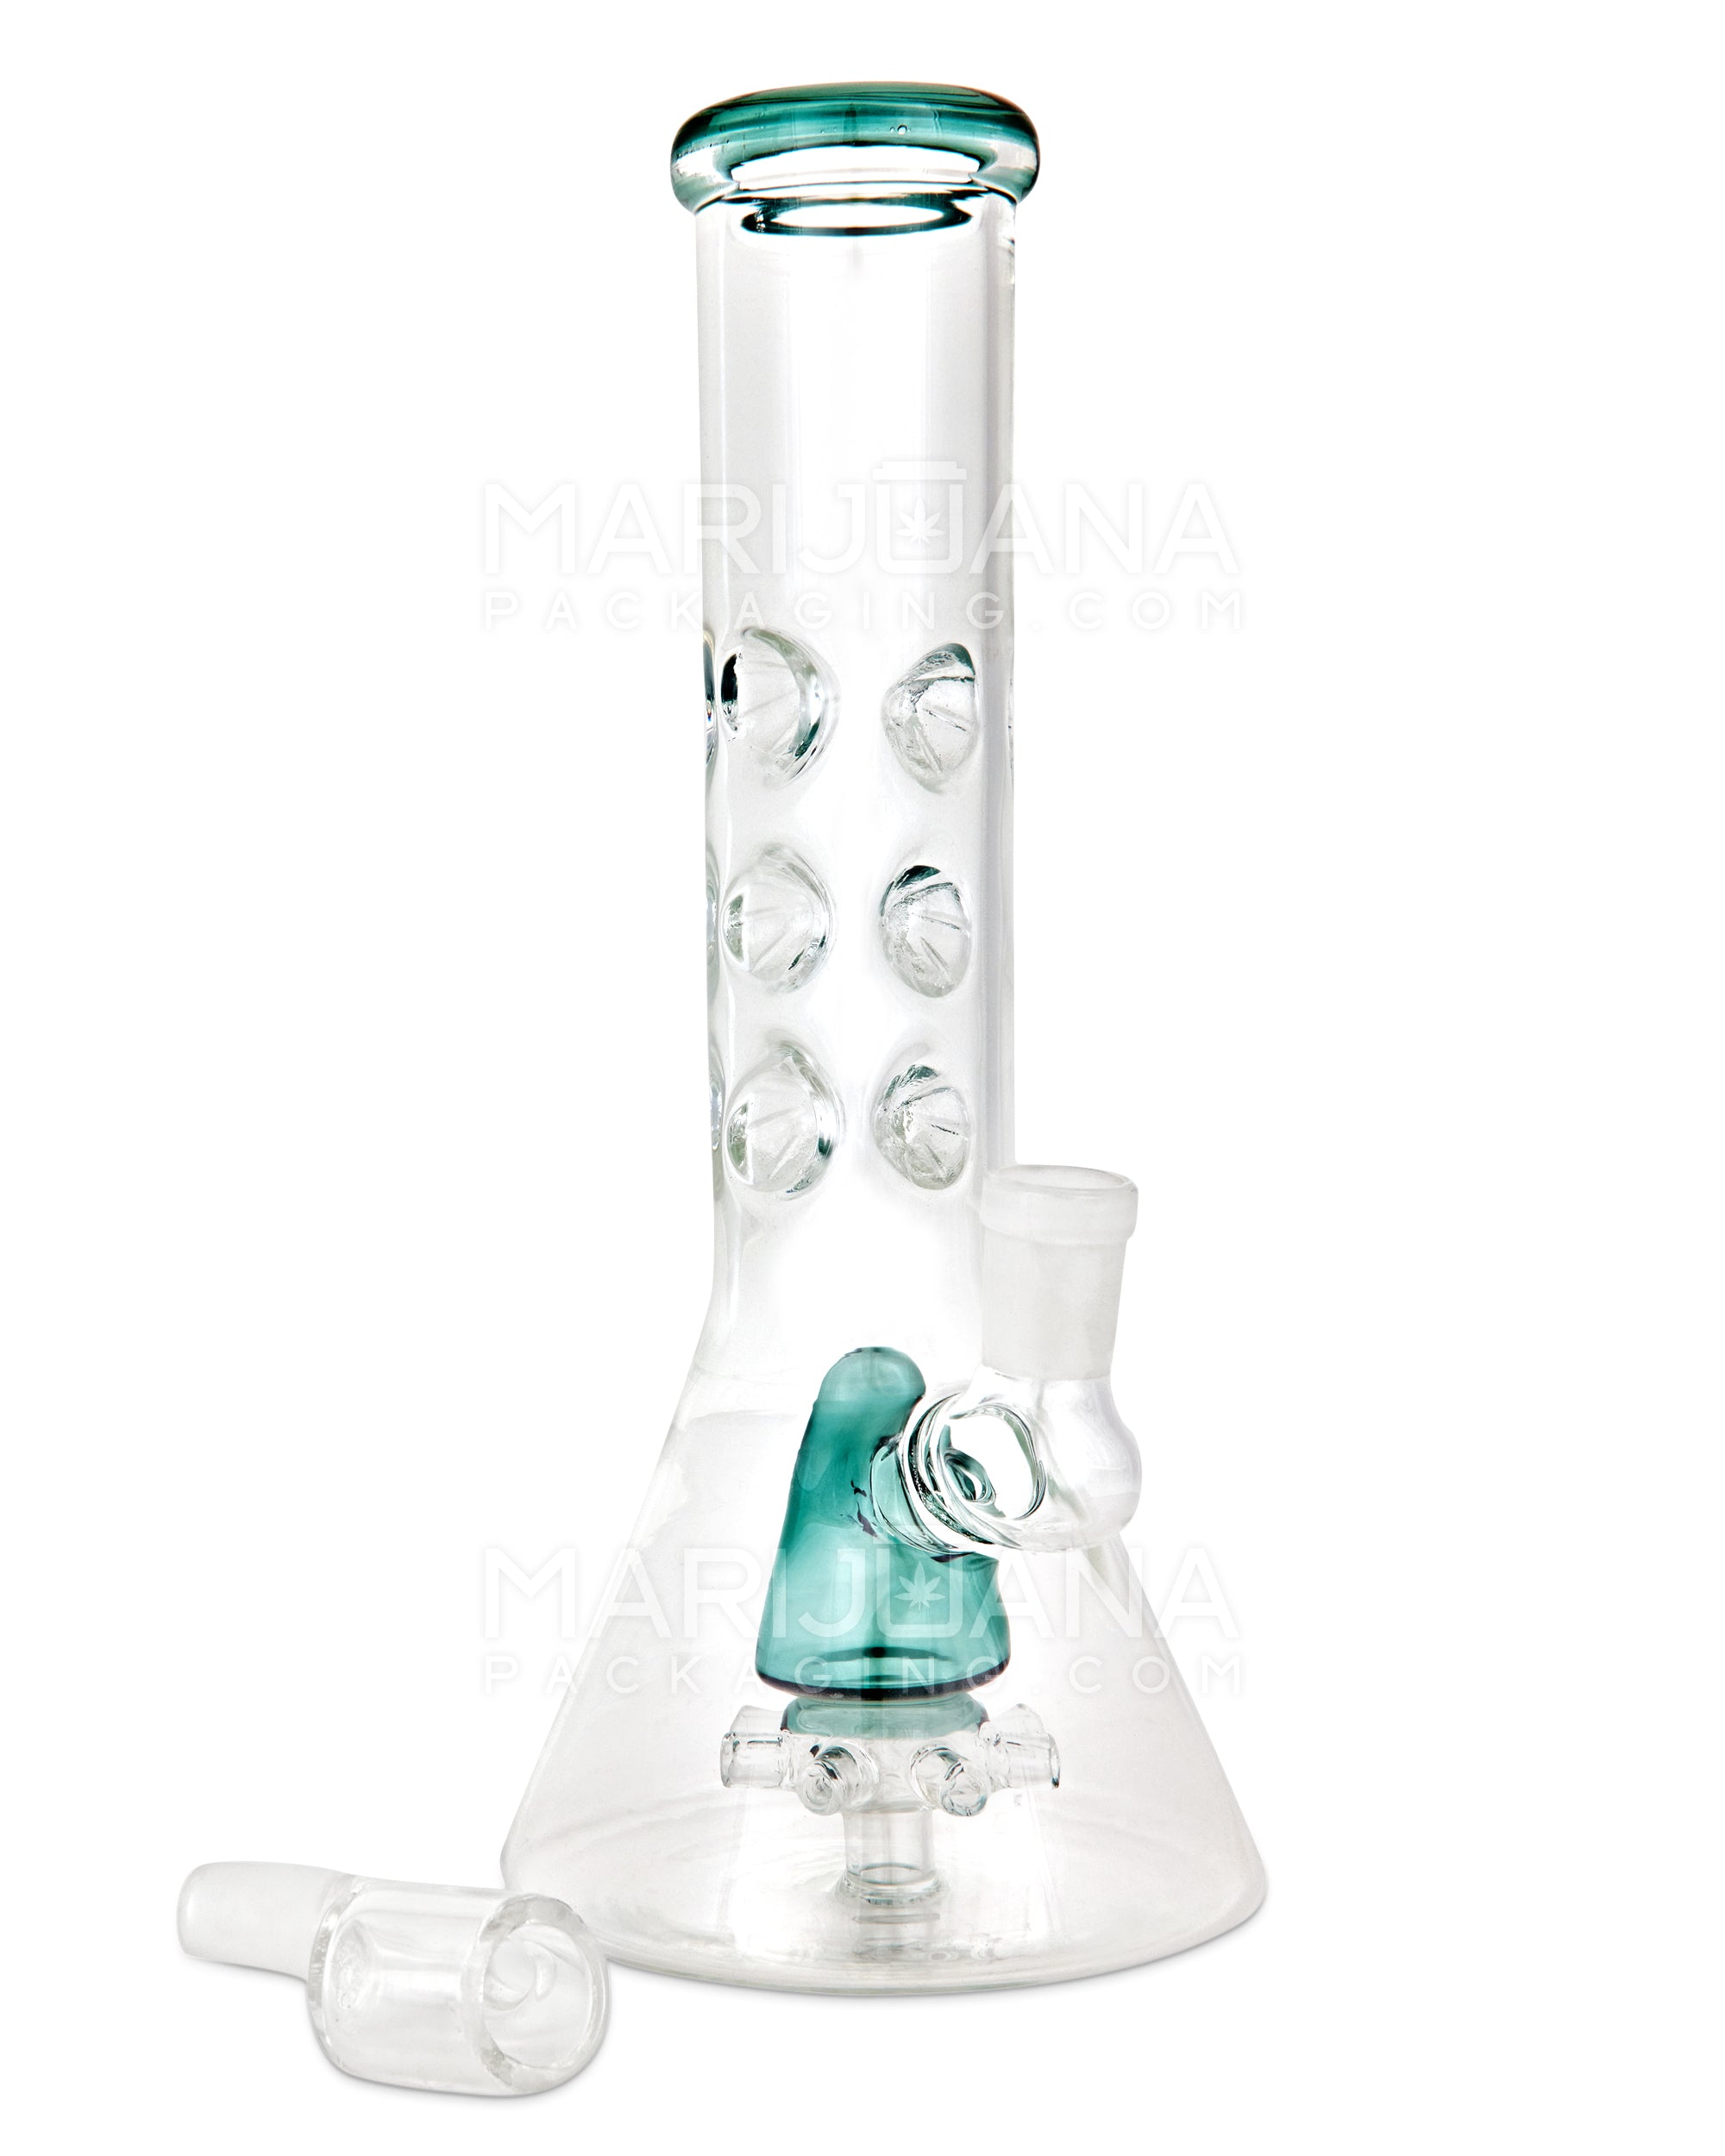 Straight Neck Atomic Perc Glass Beaker Water Pipe w/ Ice Catcher | 10in Tall - 14mm Bowl - Teal - 2